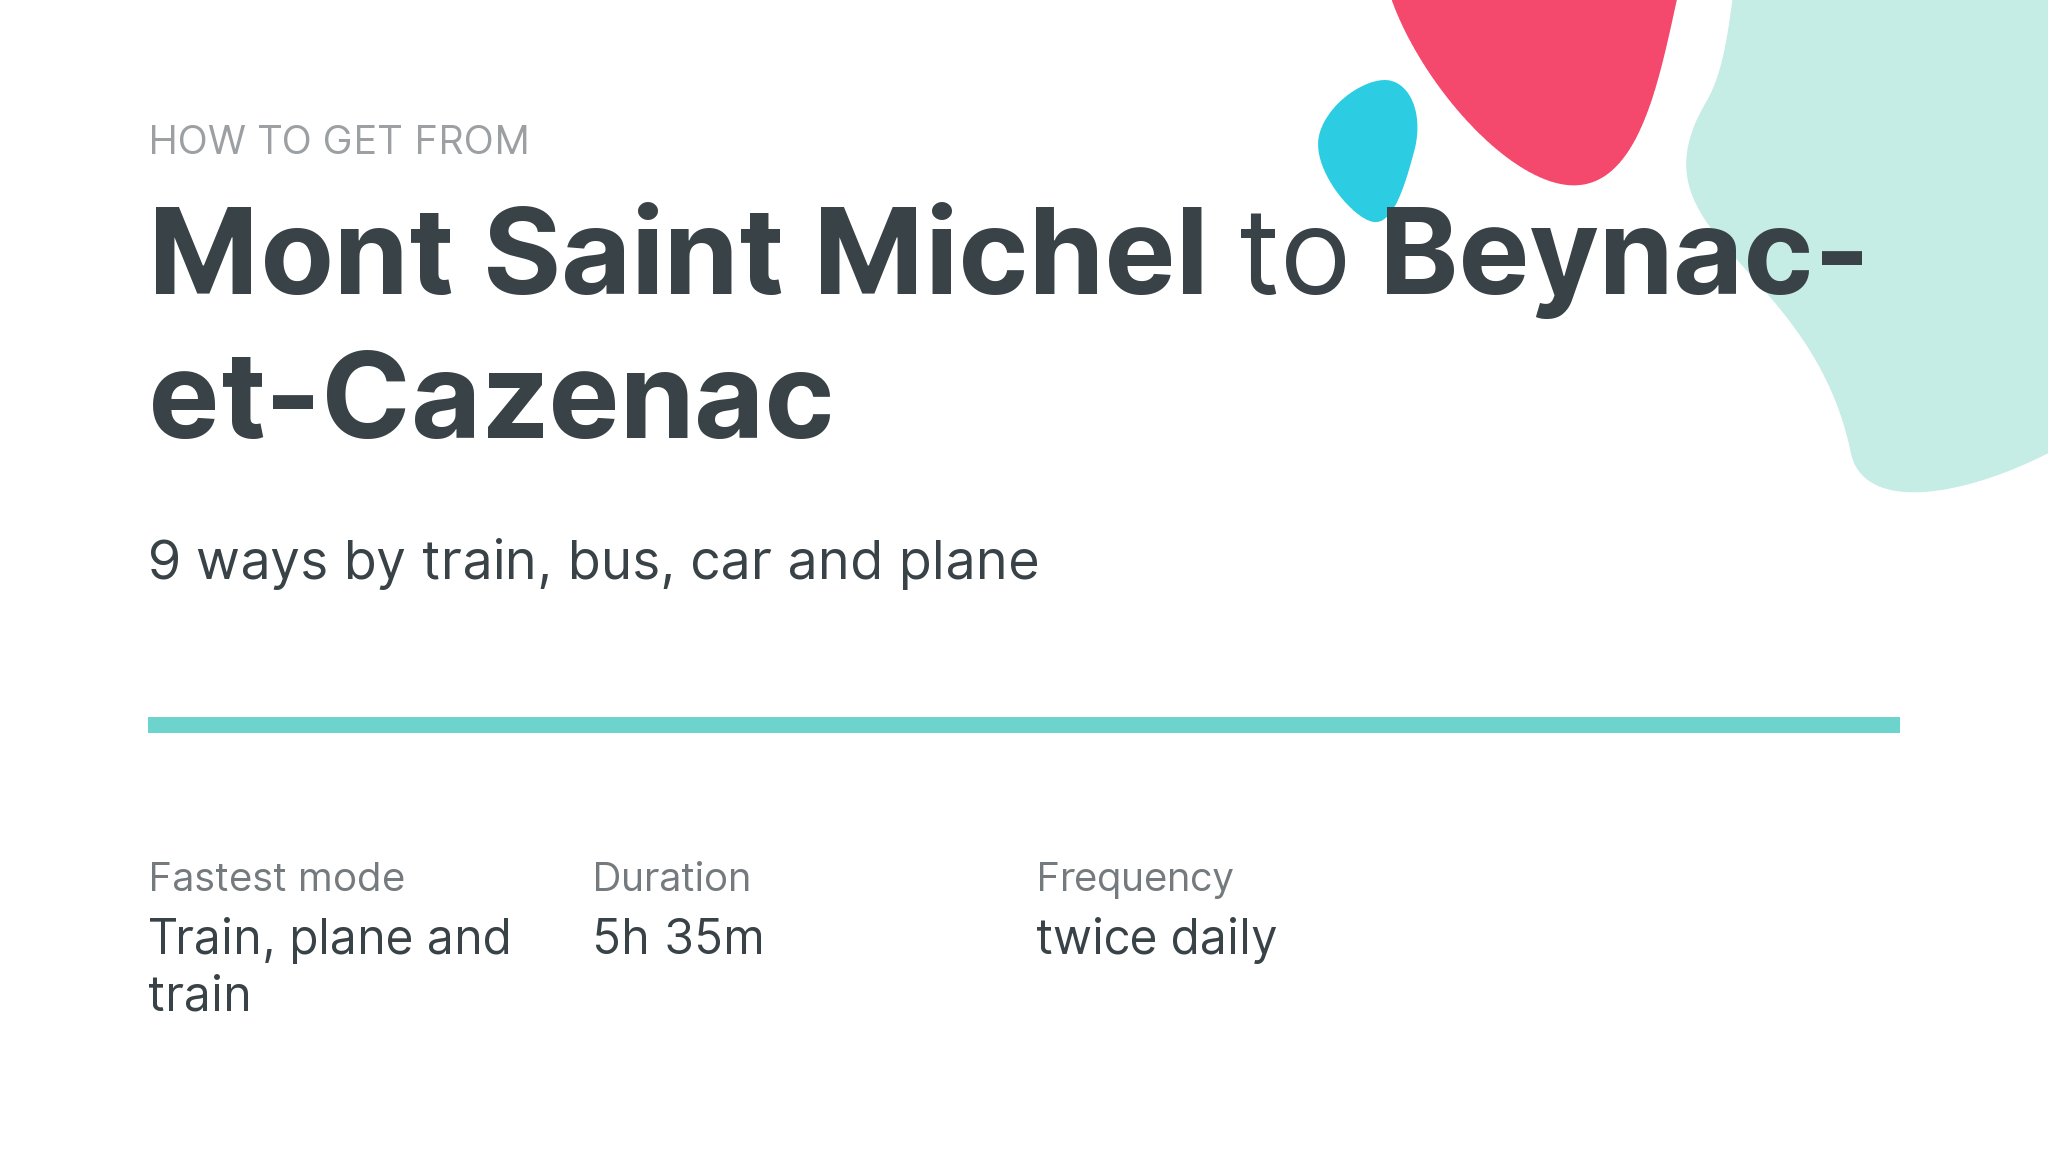 How do I get from Mont Saint Michel to Beynac-et-Cazenac